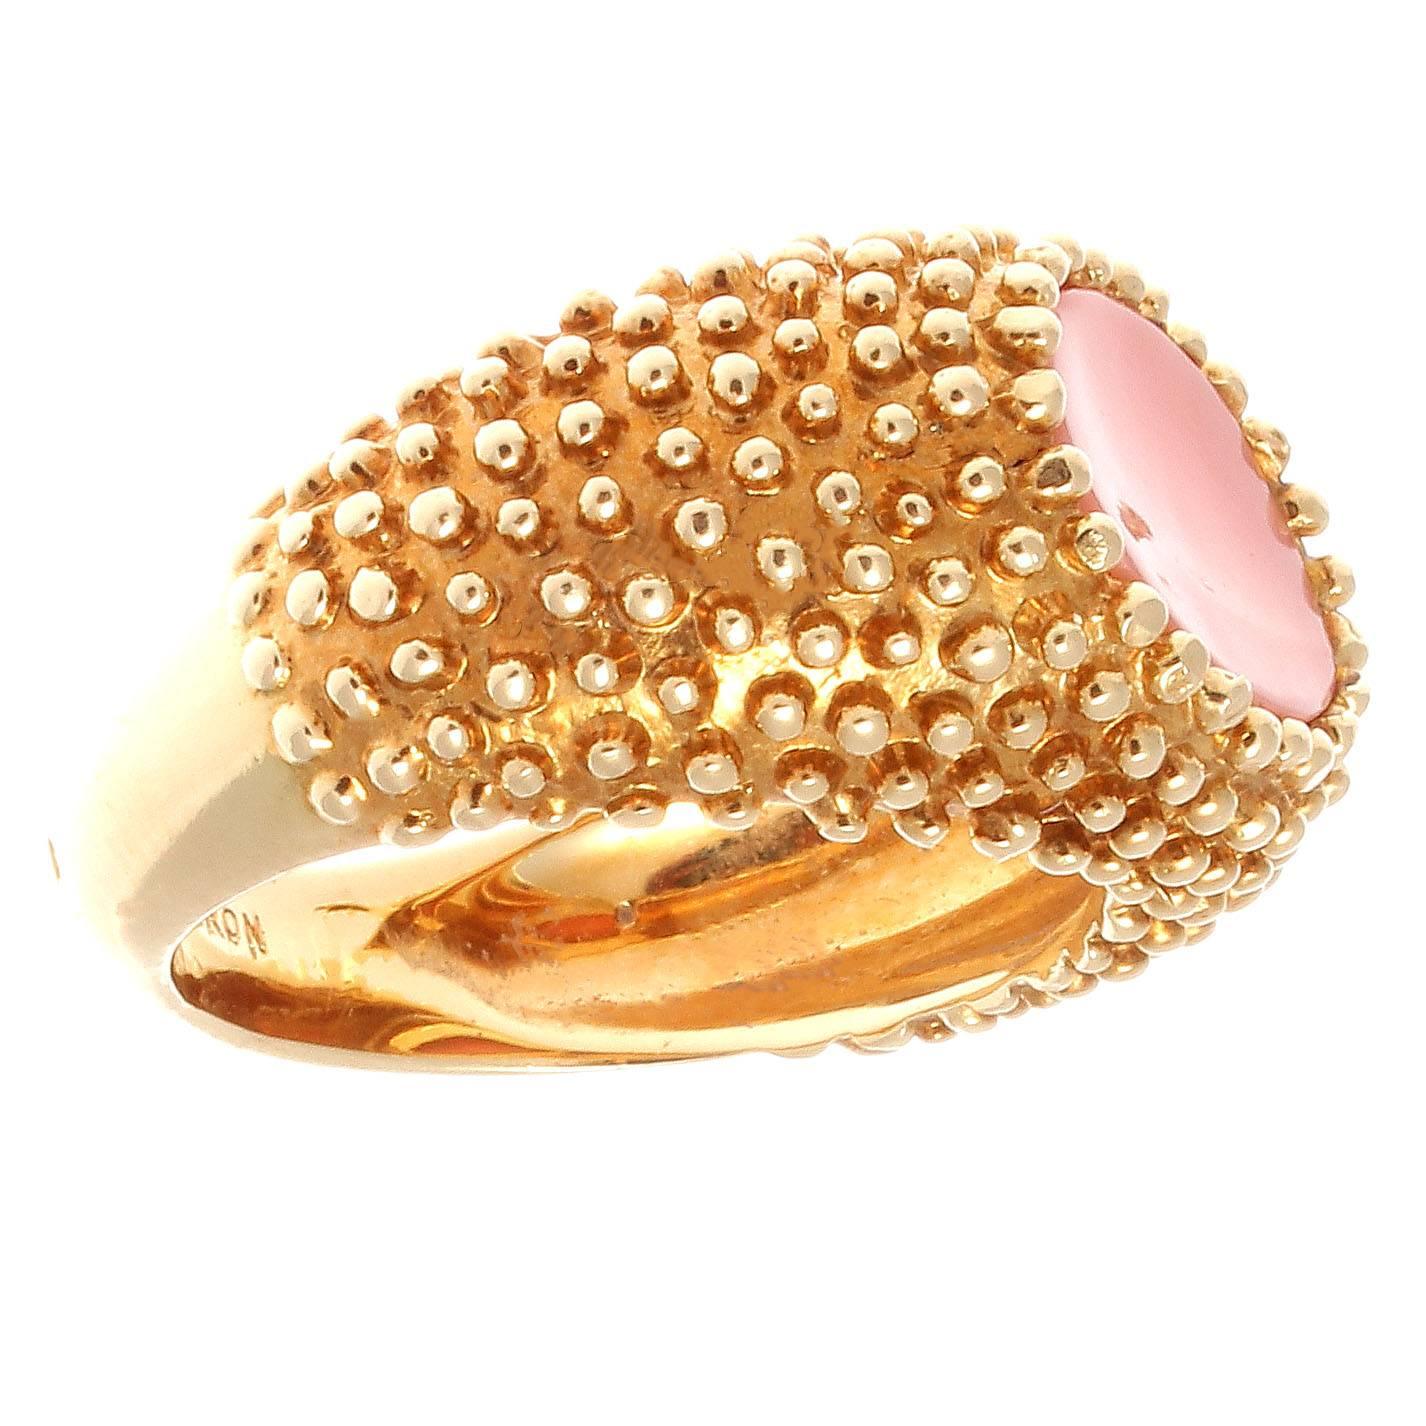 Crafted in 18k bead textured gold featuring a coral stone that is a perfect match for the golden hue of the ring. Signed Boucheron.

Ring size 5 and may be re-sized to fit.